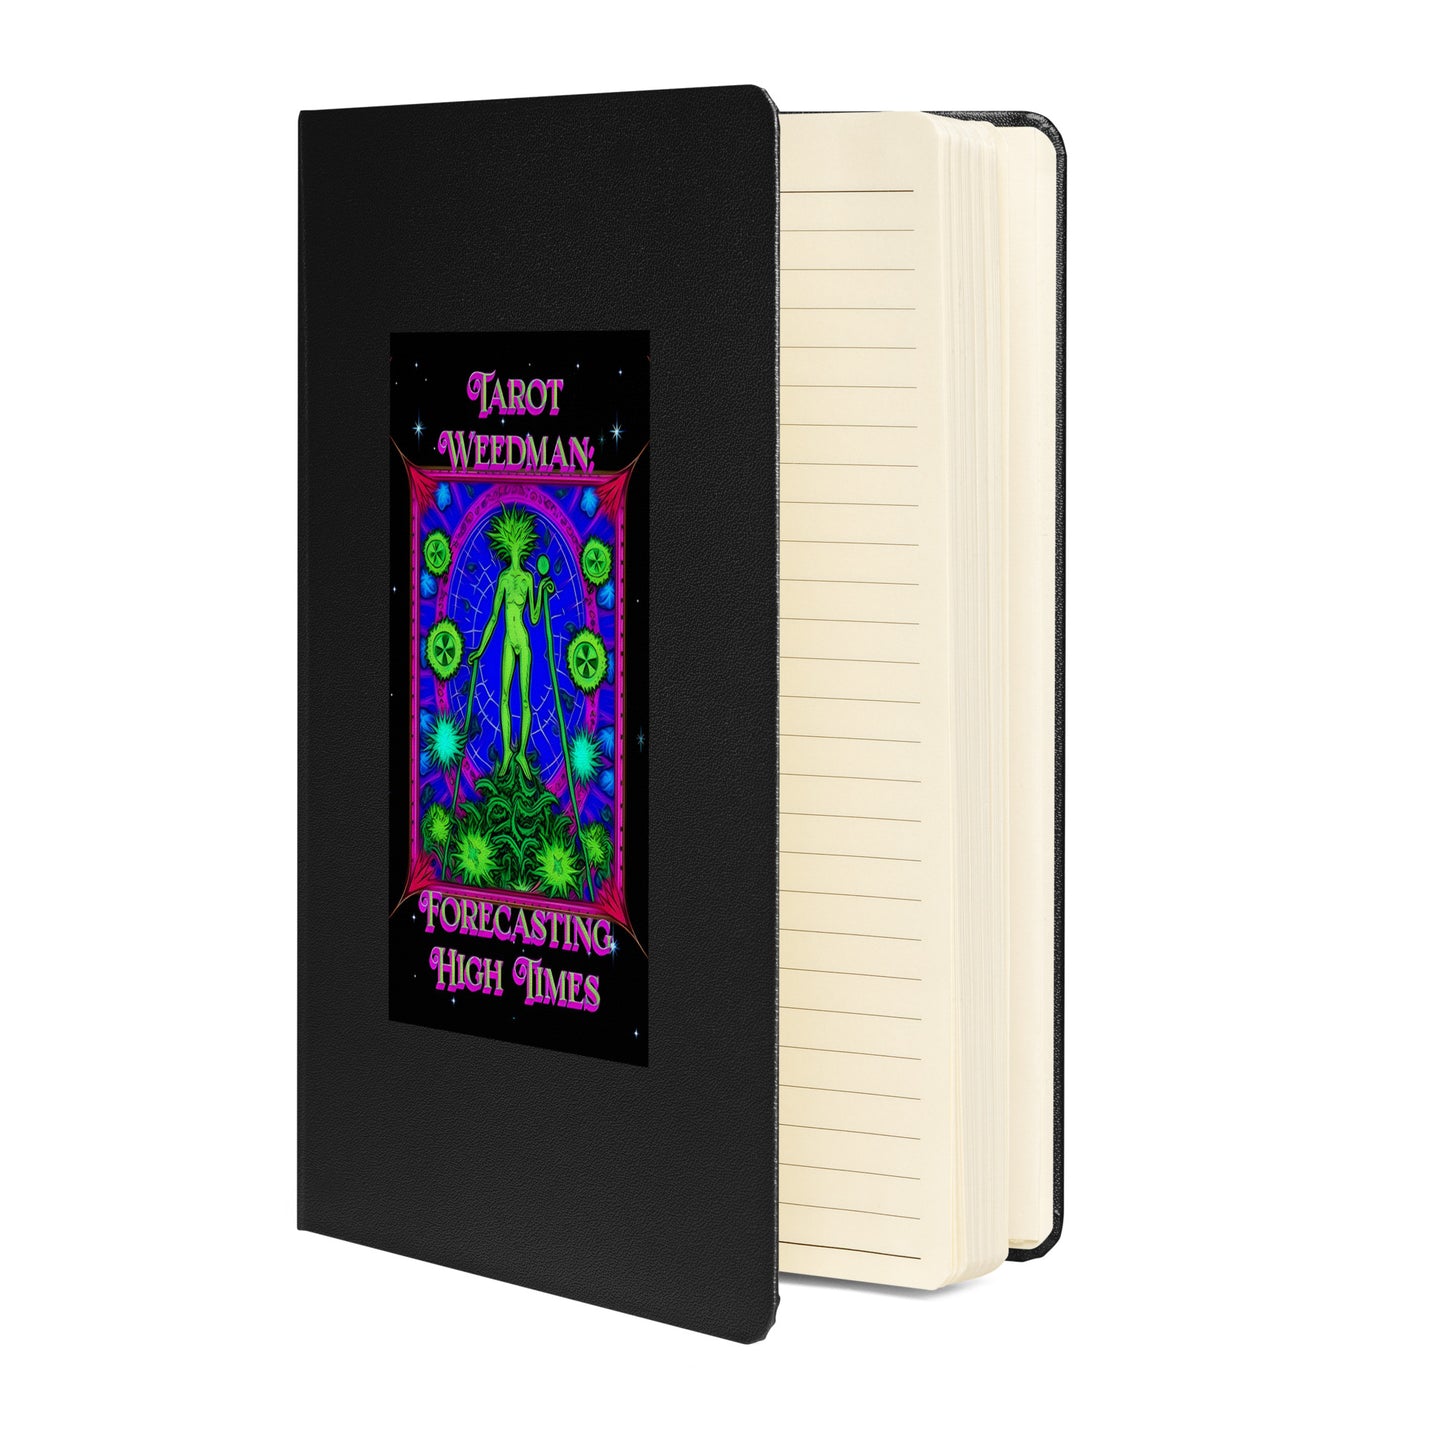 Tarot Weedman: Forecasting High Times Hardcover Bound Notebook